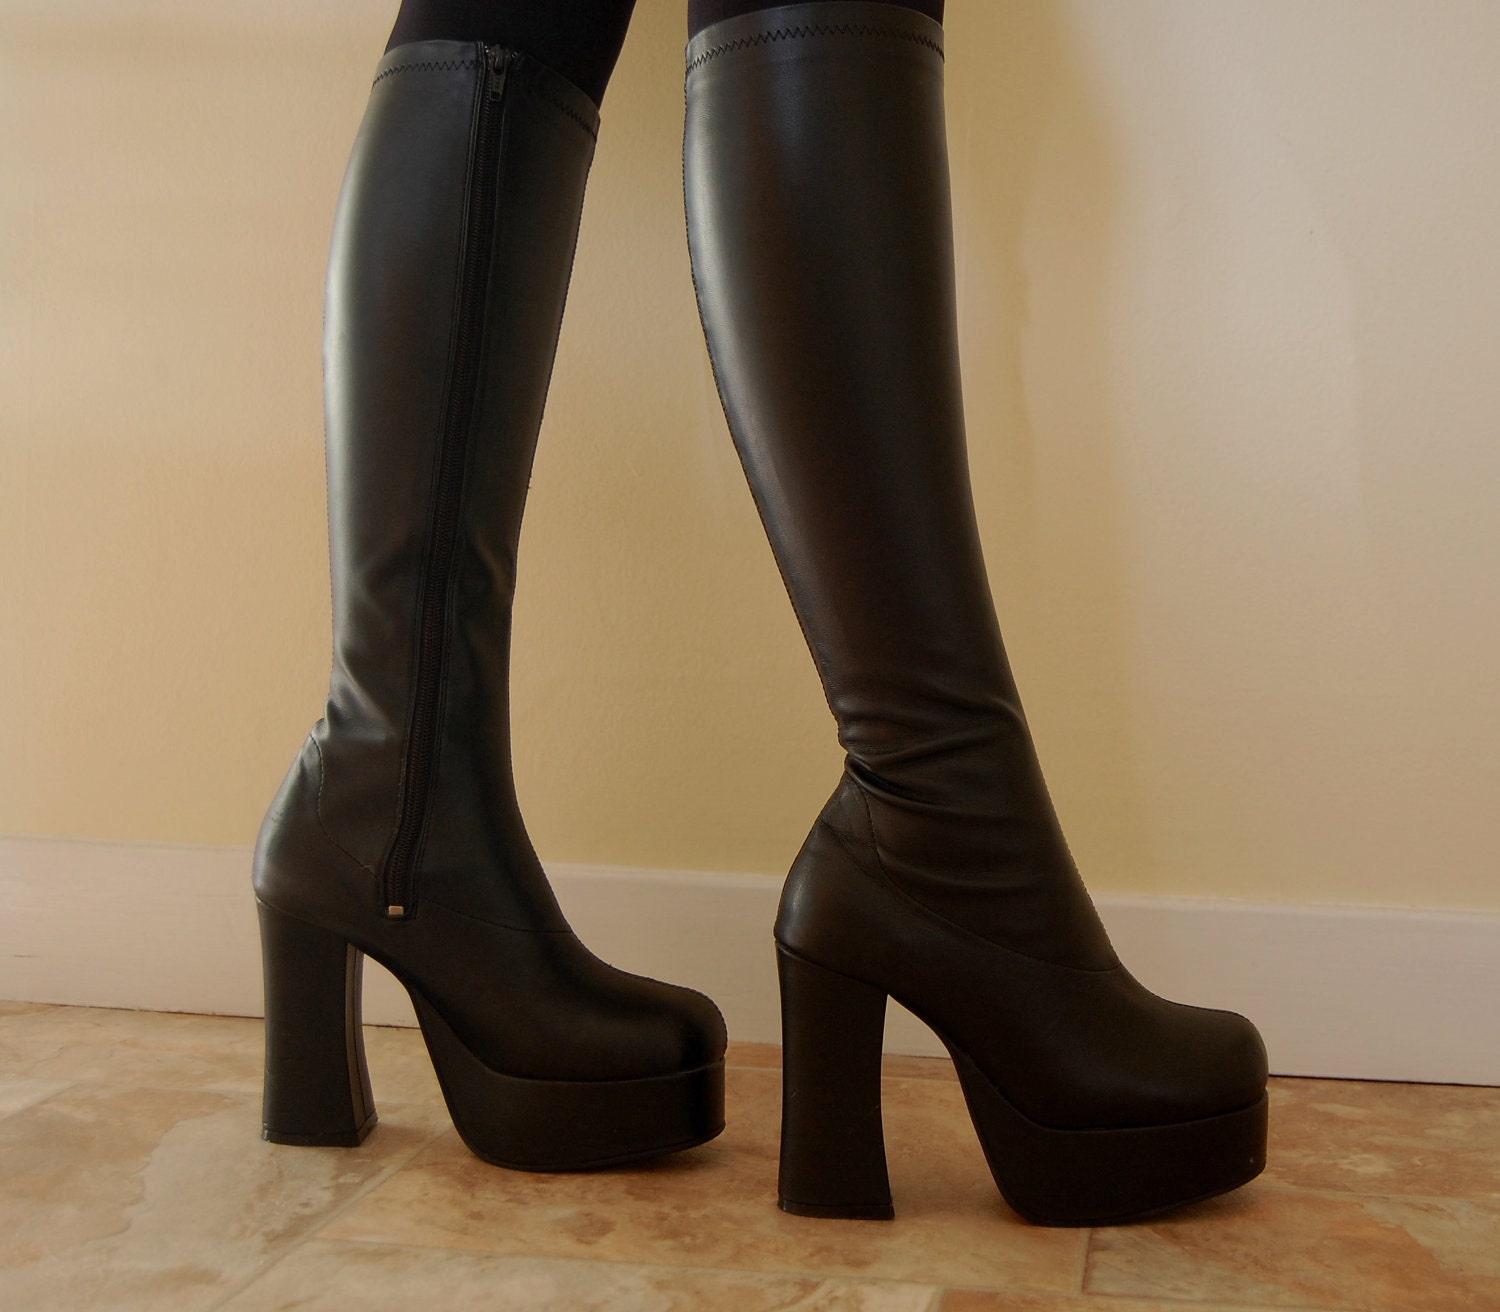 90s Grunge Goth Black Knee High Chunky Platform Boots By Micromall